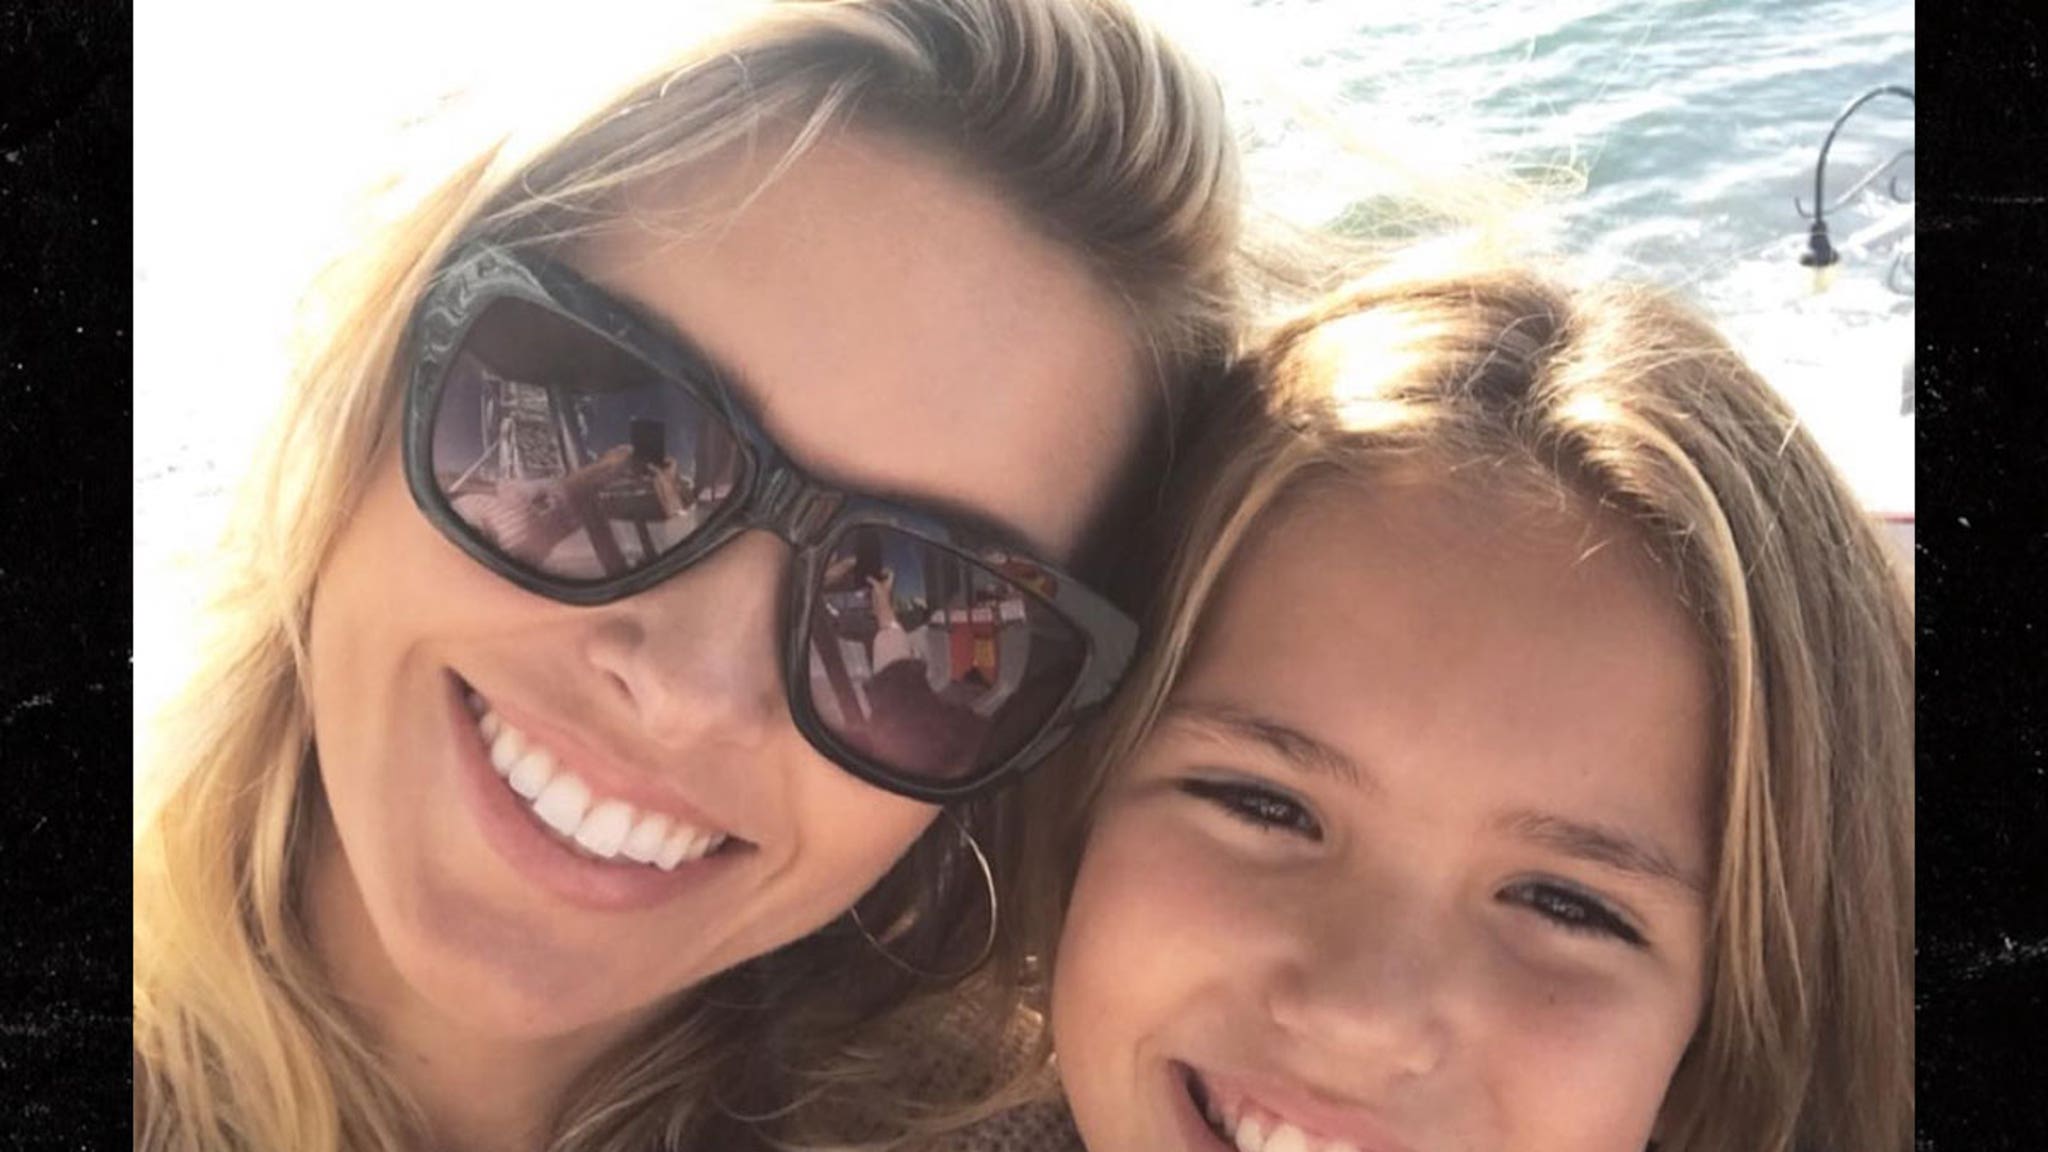 Audrina Patridge’s 15-Year-Old Niece Died from Drug Overdose, Cops Investigating